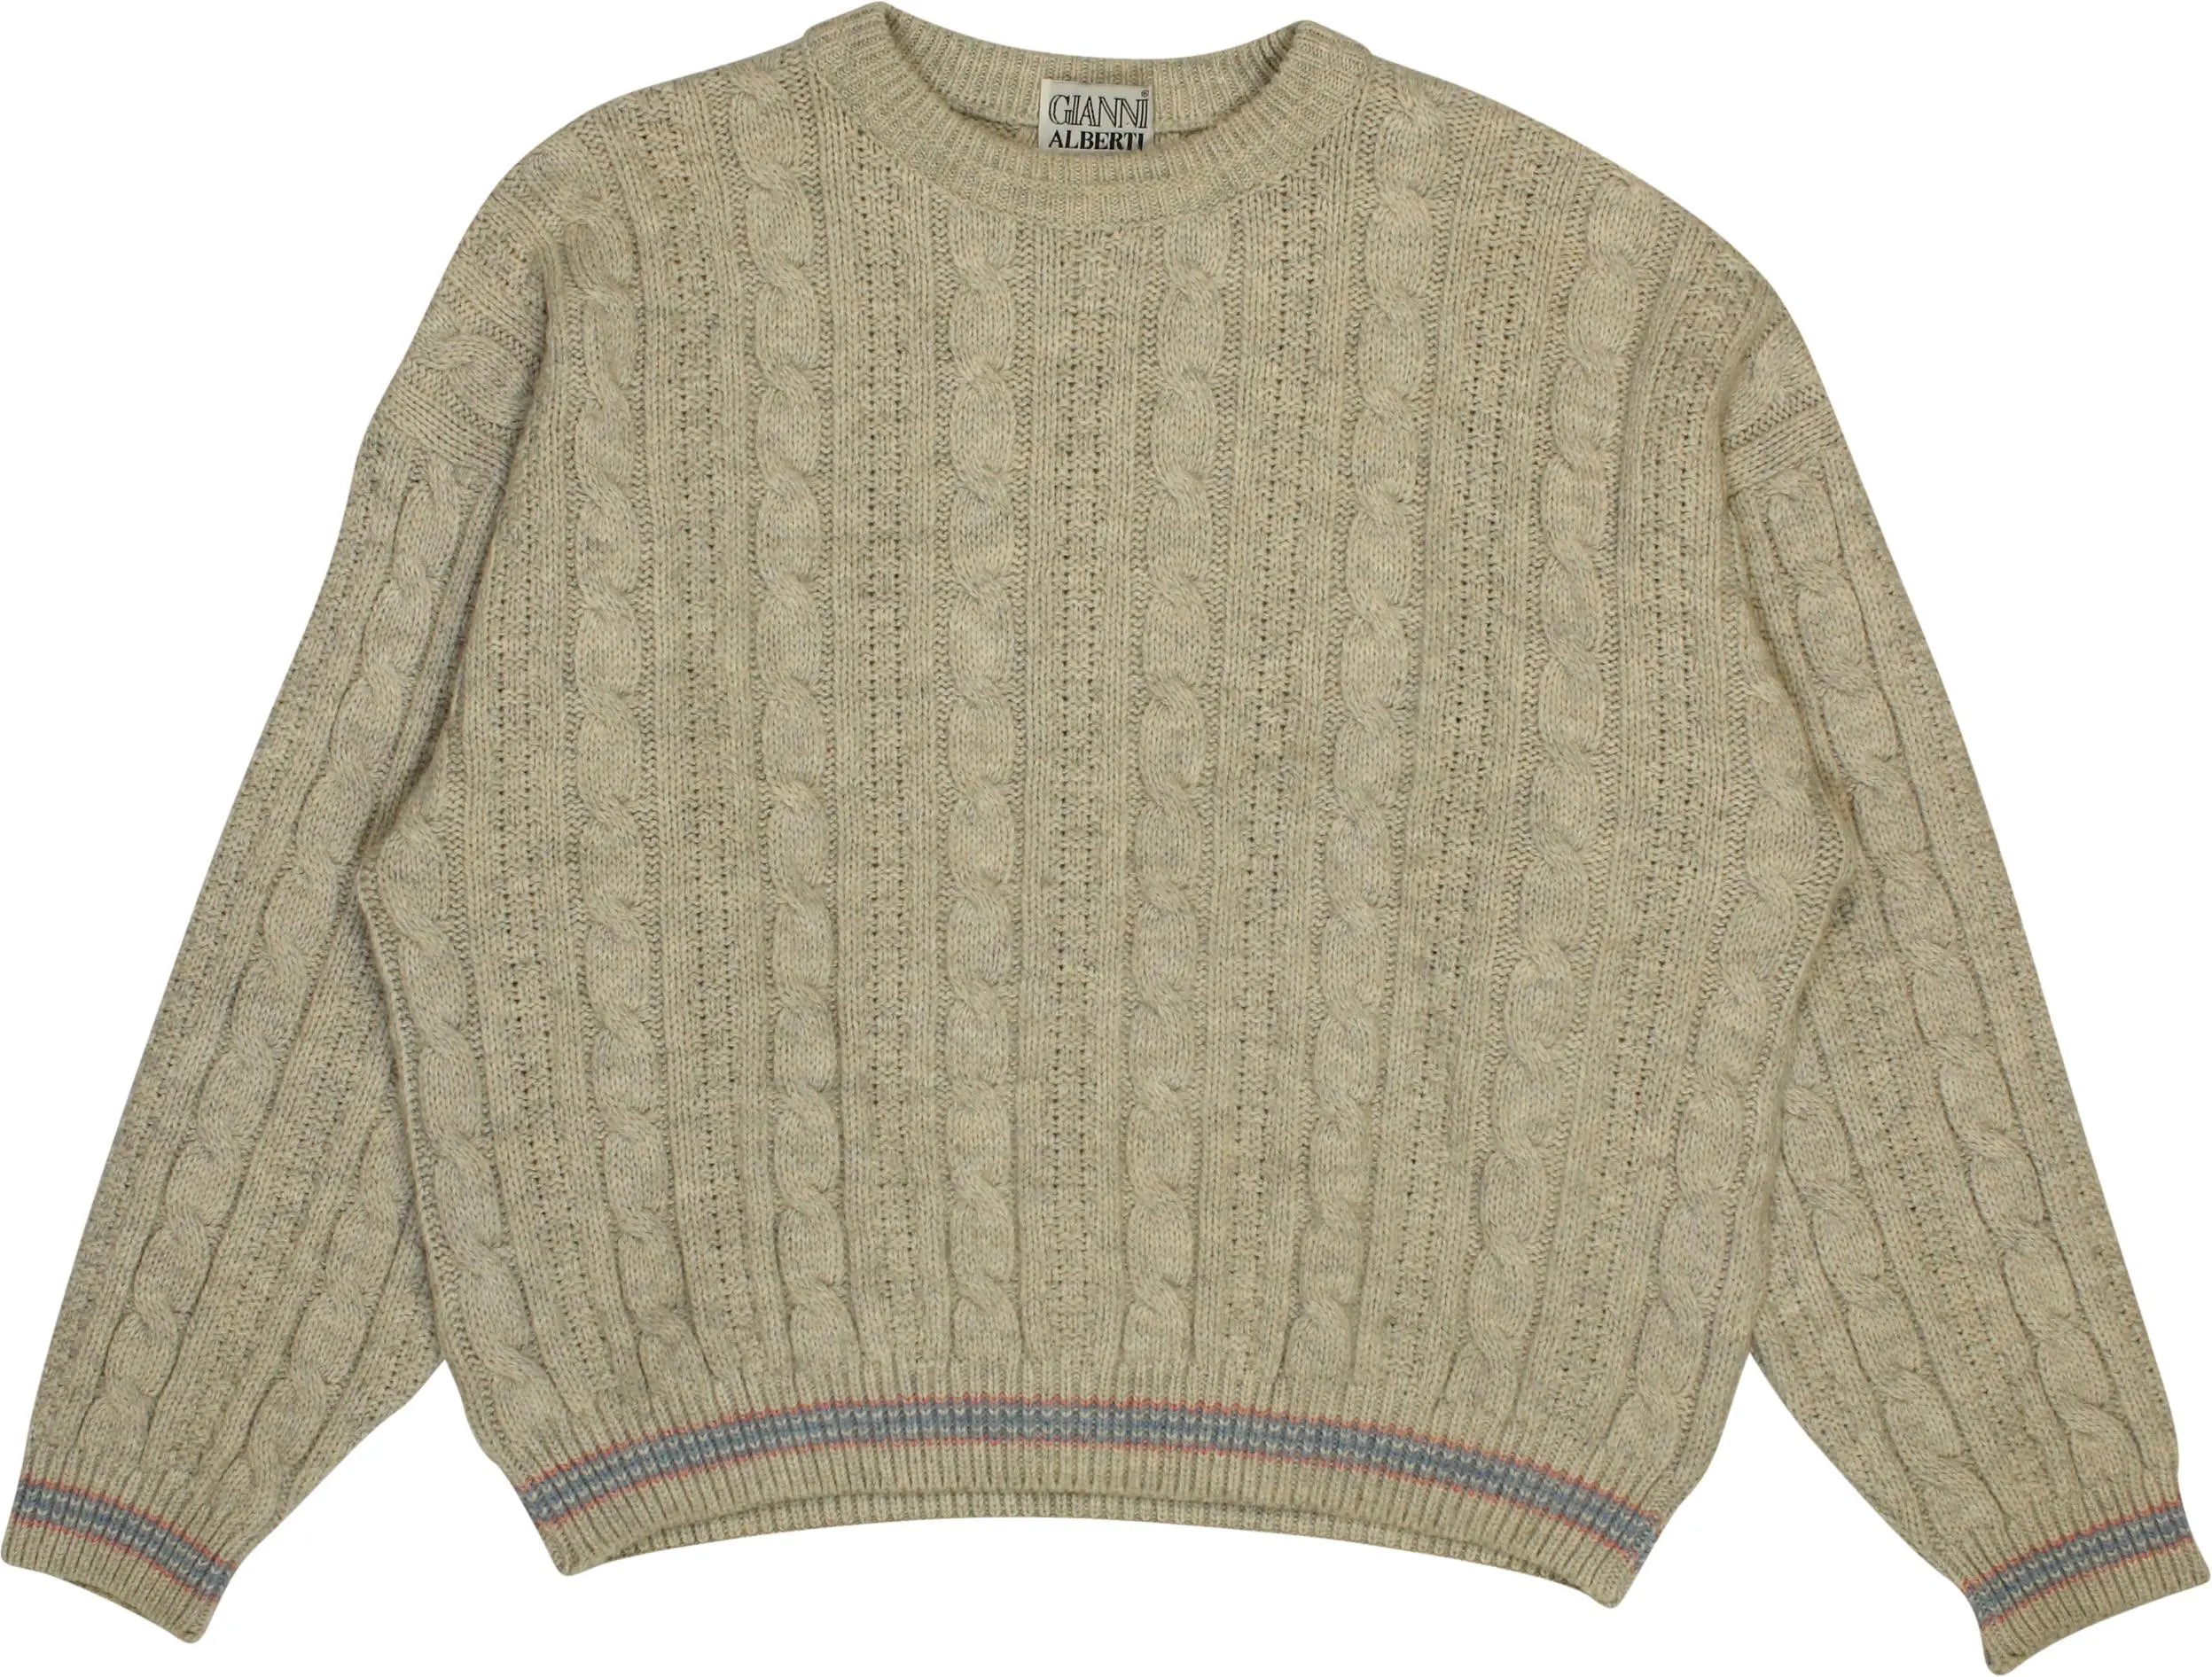 Gianni Alberti - Grey Cable Jumper- ThriftTale.com - Vintage and second handclothing